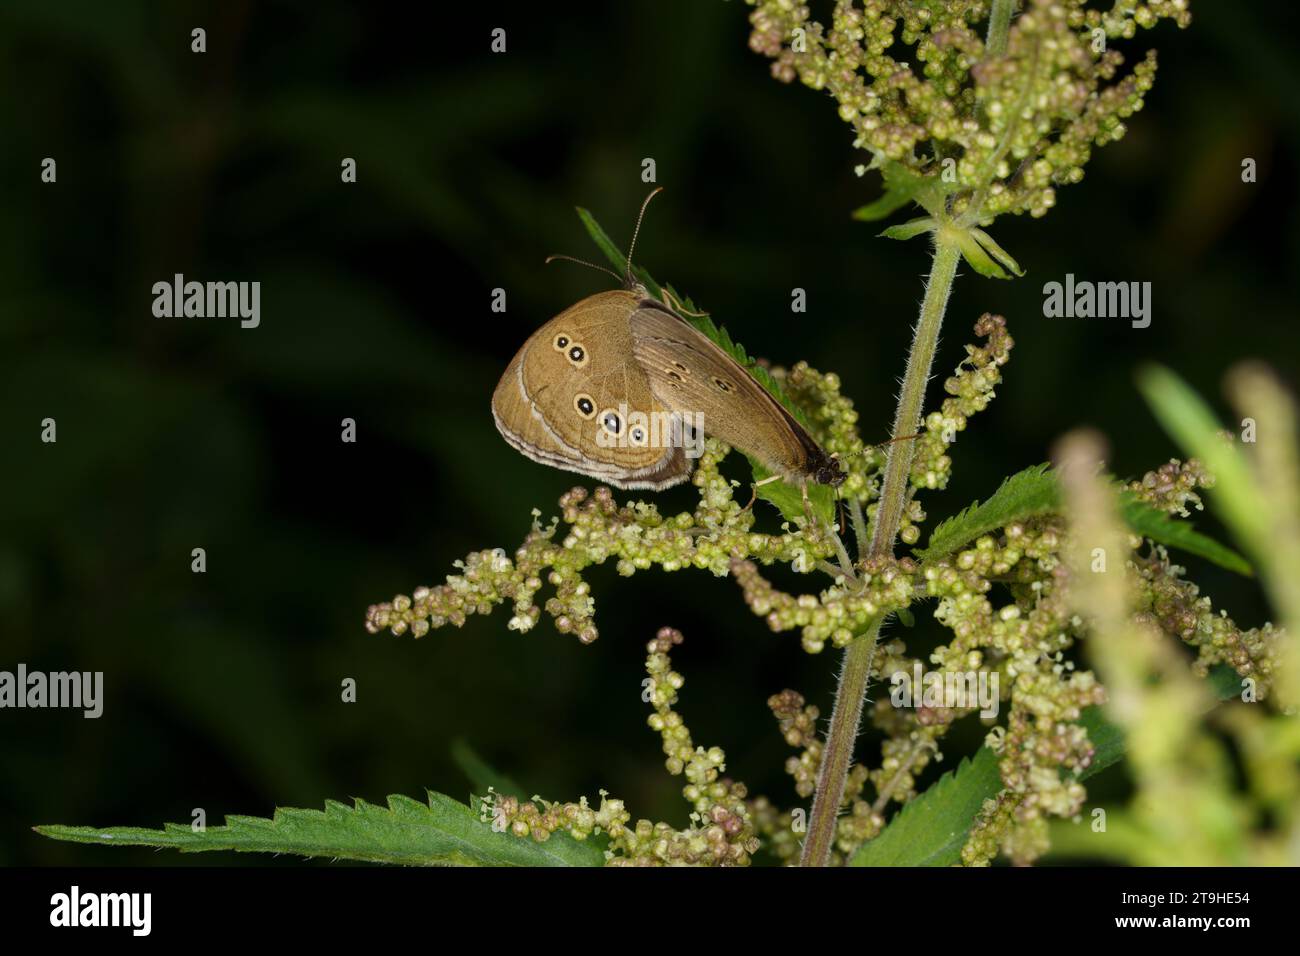 Mating Aphantopus hyperanthus Family Nymphalidae Genus Aphantopus Ringlet butterfly wild nature insect wallpaper, picture, photography Stock Photo